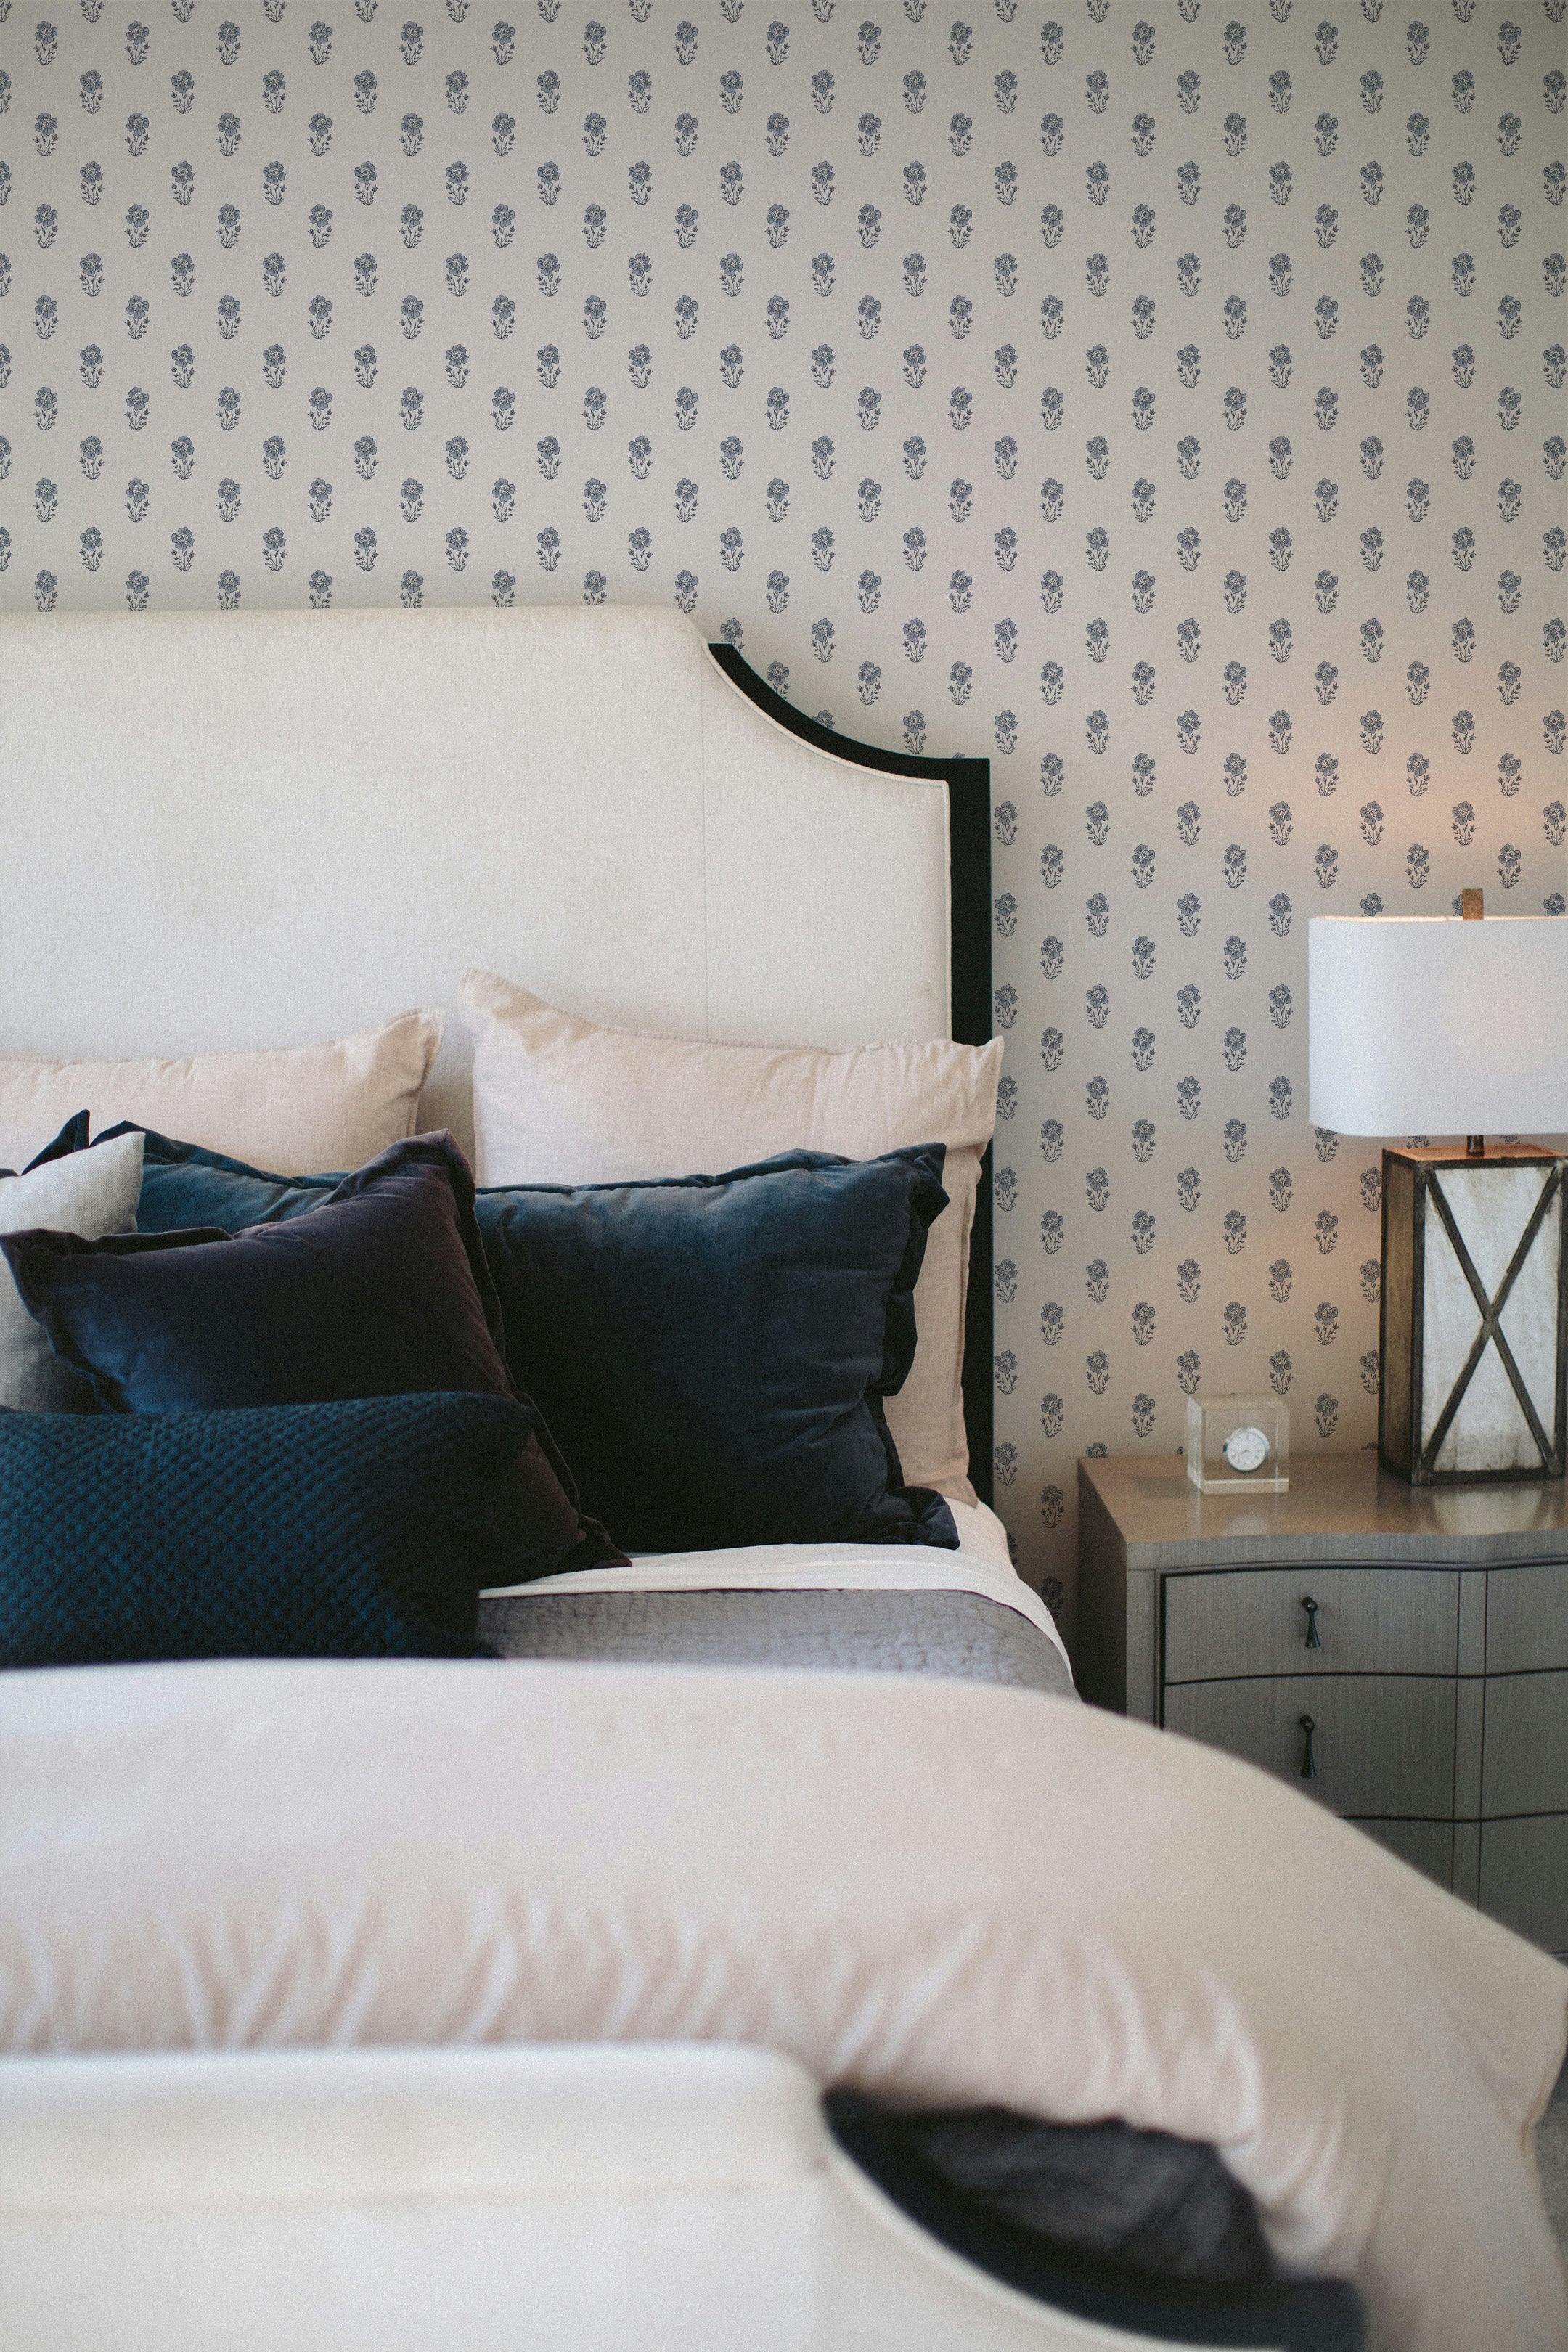 Elegant bedroom setup showing a large bed with a curved headboa0rd against a wall adorned with Tiny Hydrangea wallpaper. The bed is accessorized with dark blue and beige pillows, a side table with a lamp and a decorative box, creating a serene and sophisticated ambiance.